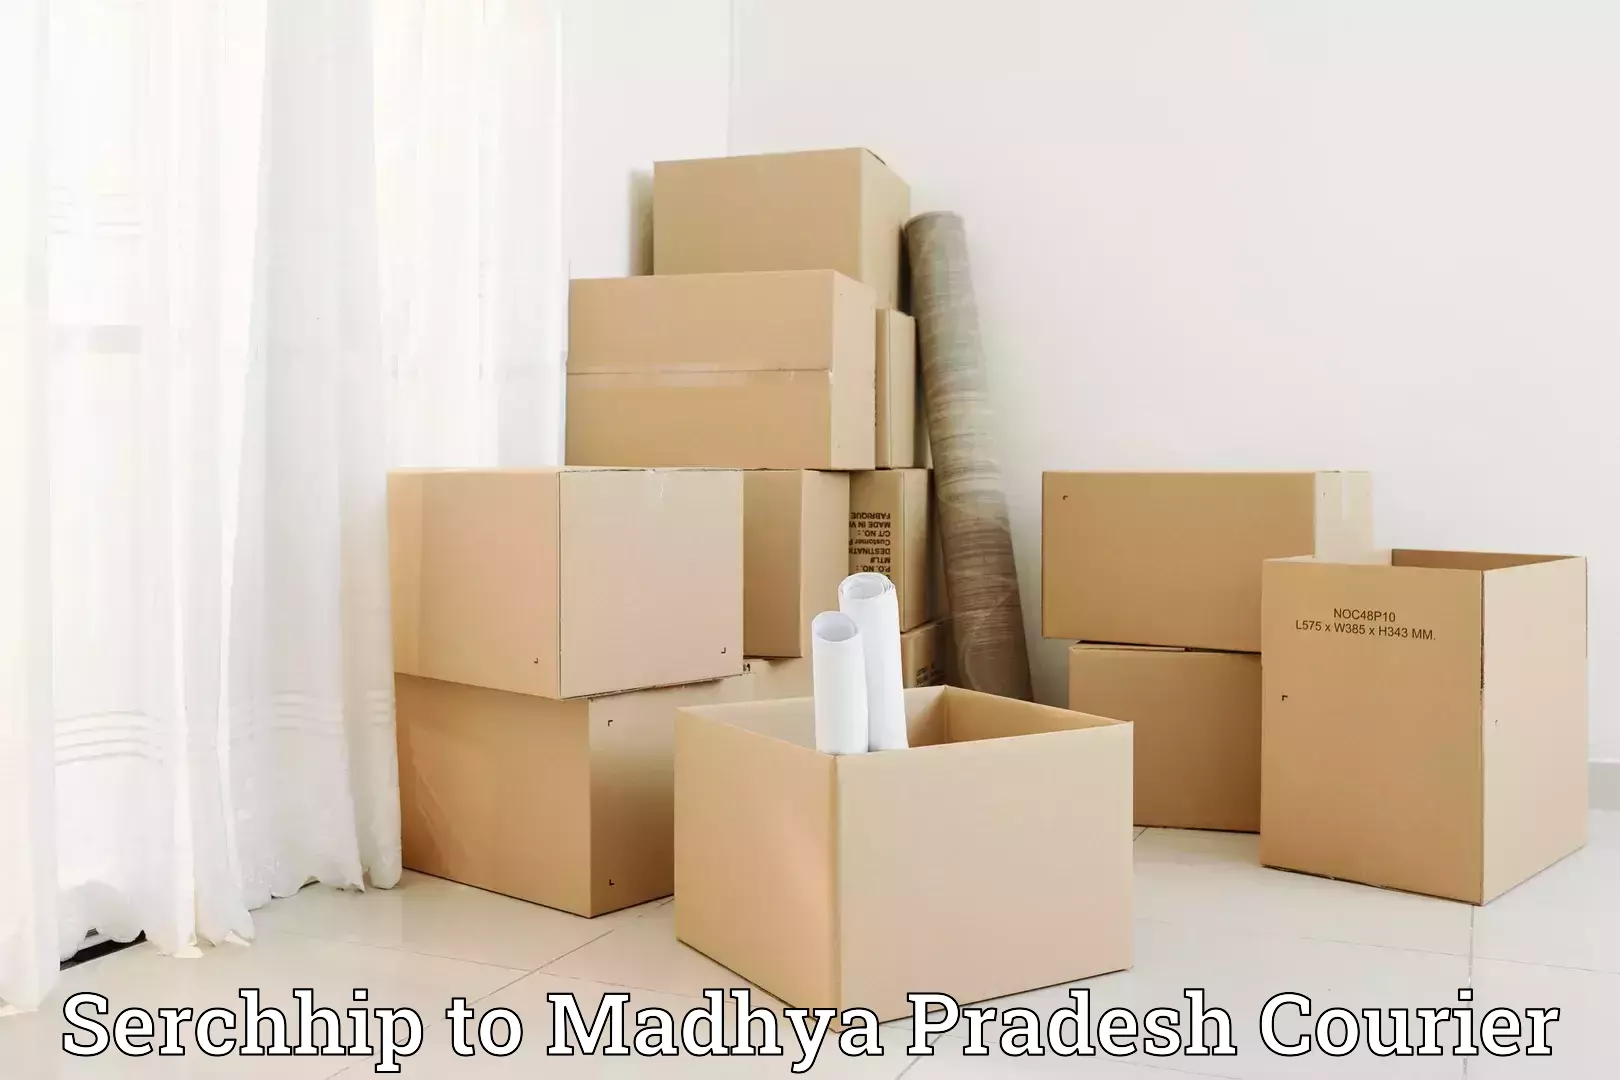 Residential moving experts Serchhip to Indore